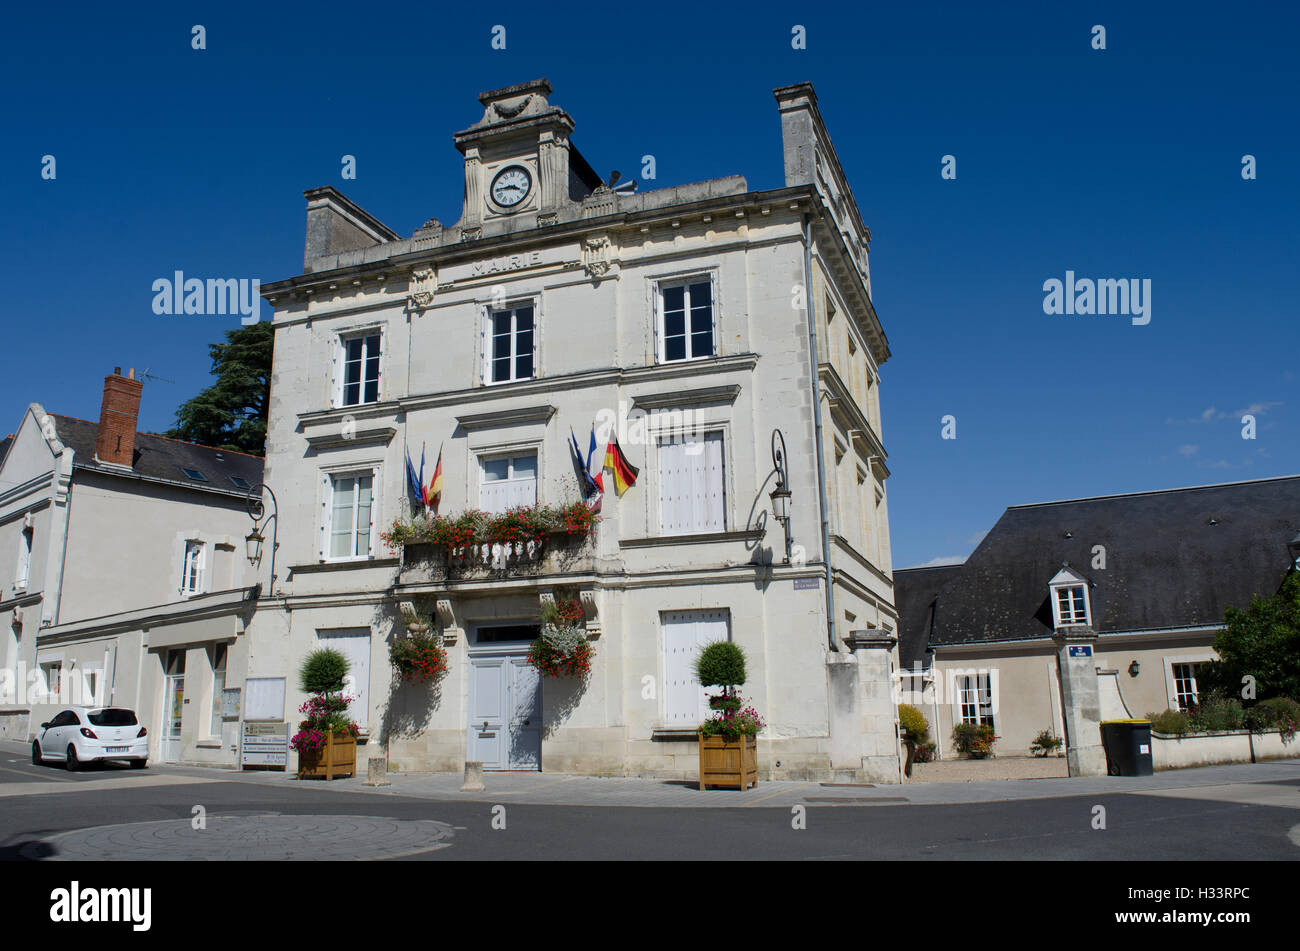 The town Marie at Vouvray in the Loire region of France  Town Hall building in this French wine town called Vouvray Stock Photo